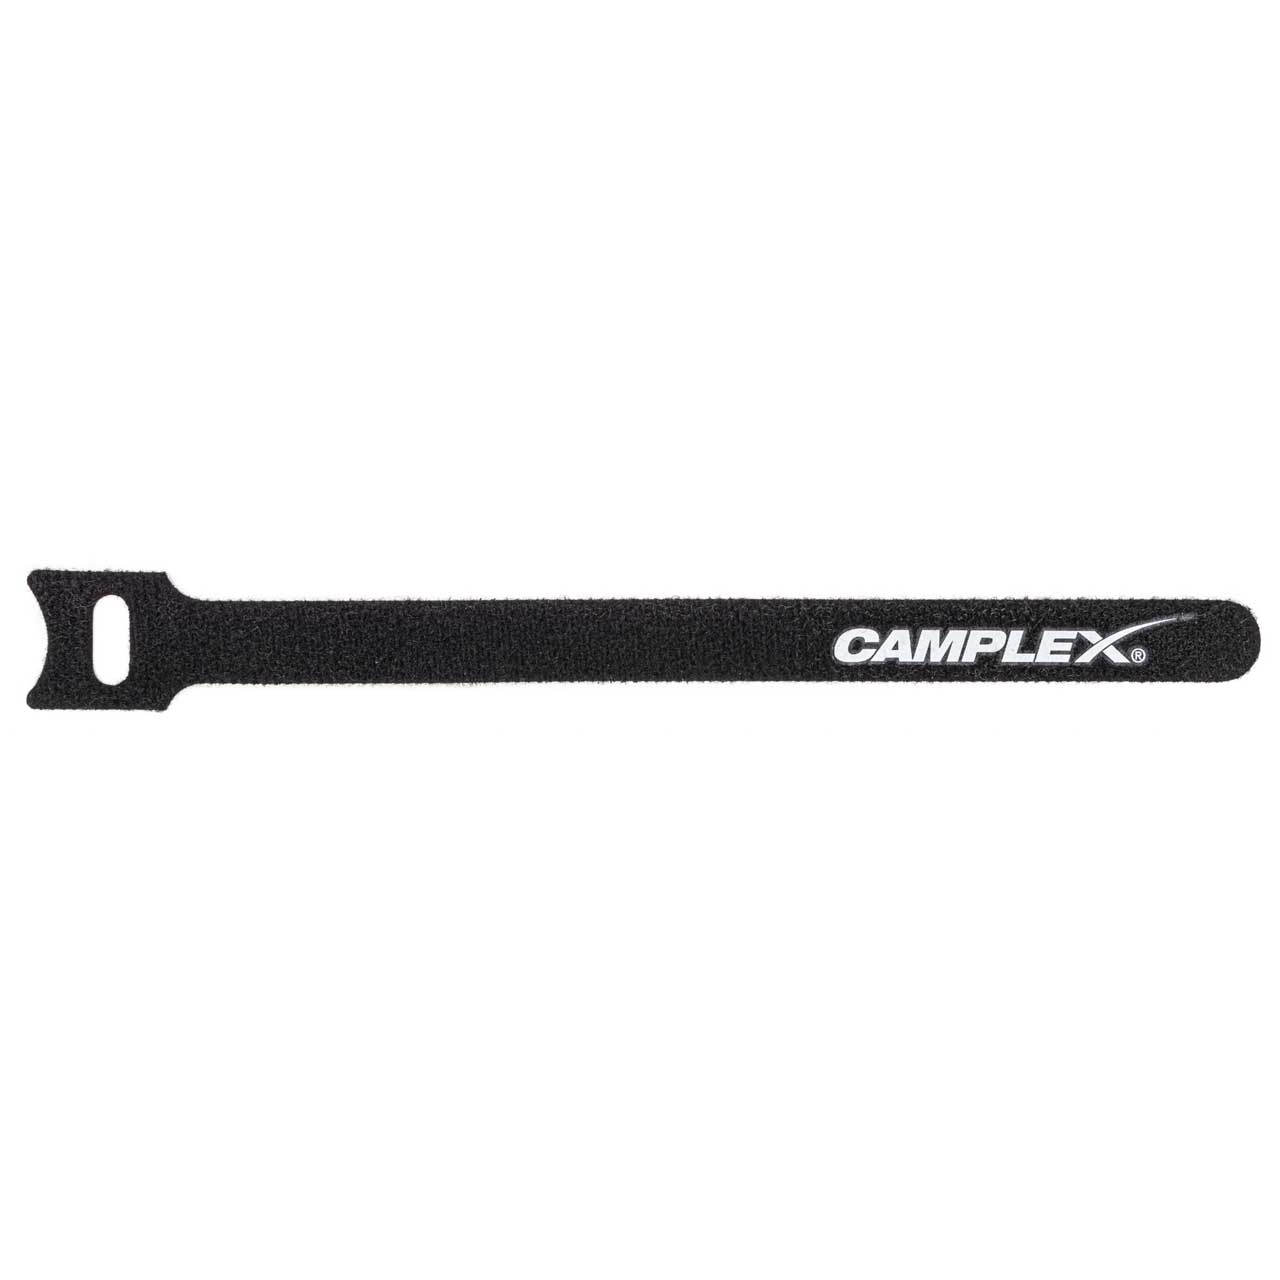 Camplex Hook and Loop Cable Wrap 12mm x 180mm Black with White Logo - 50 Pack CMX-HKNLP-50PK